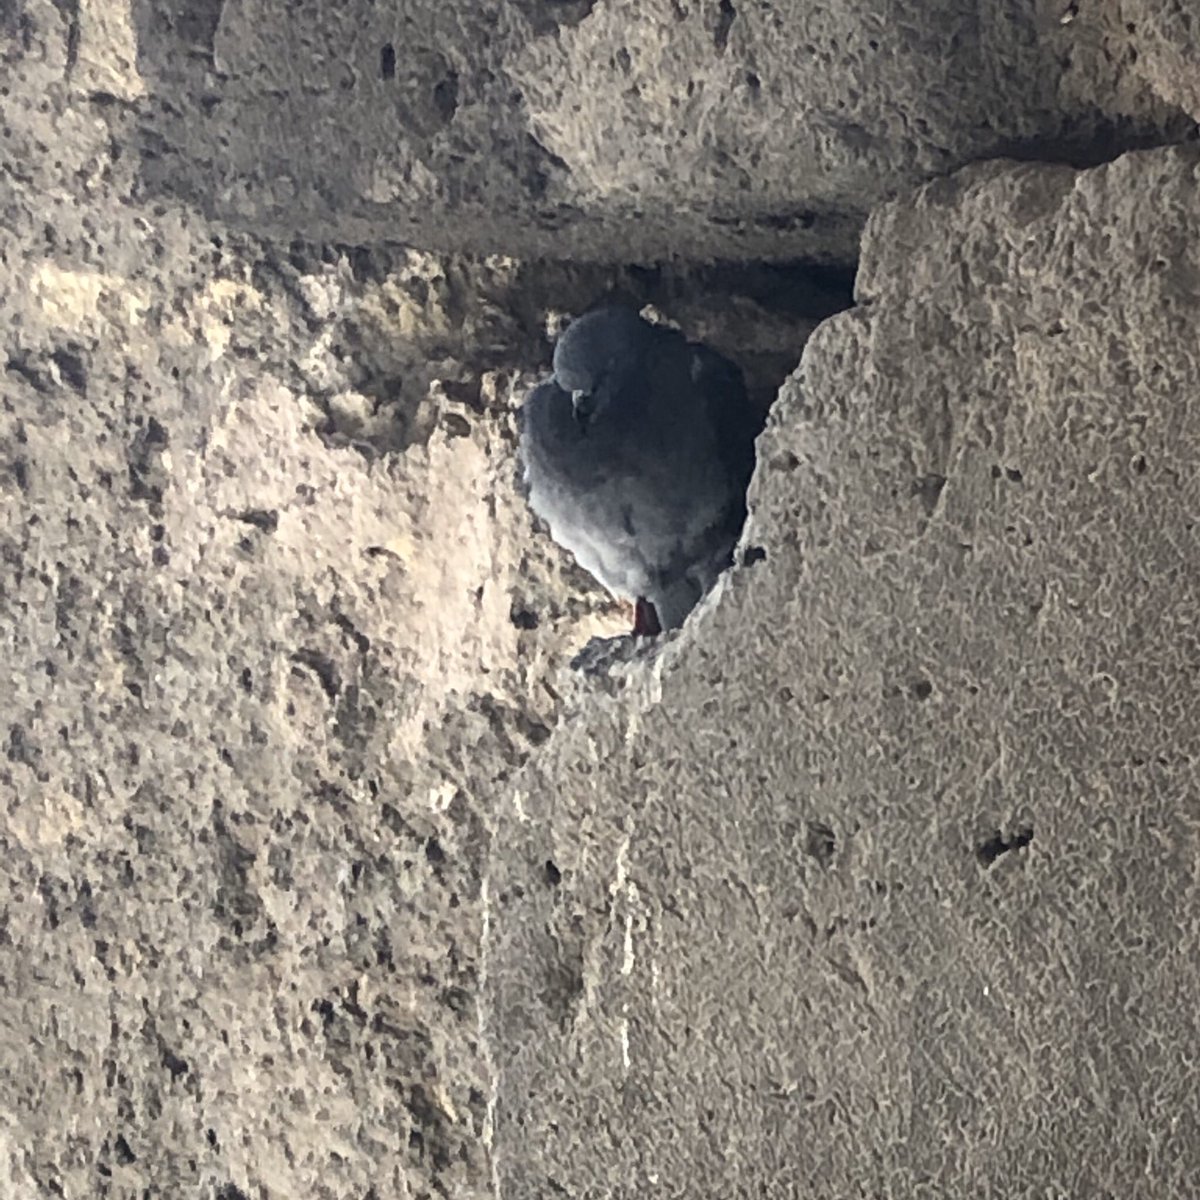 The two pigeons that Telos and I had discovered within a relatively quiet area at The Colosseum. They both seemed to have resided in their own respective lands, likely appreciating the ancient structure that may had given them a warm welcome.